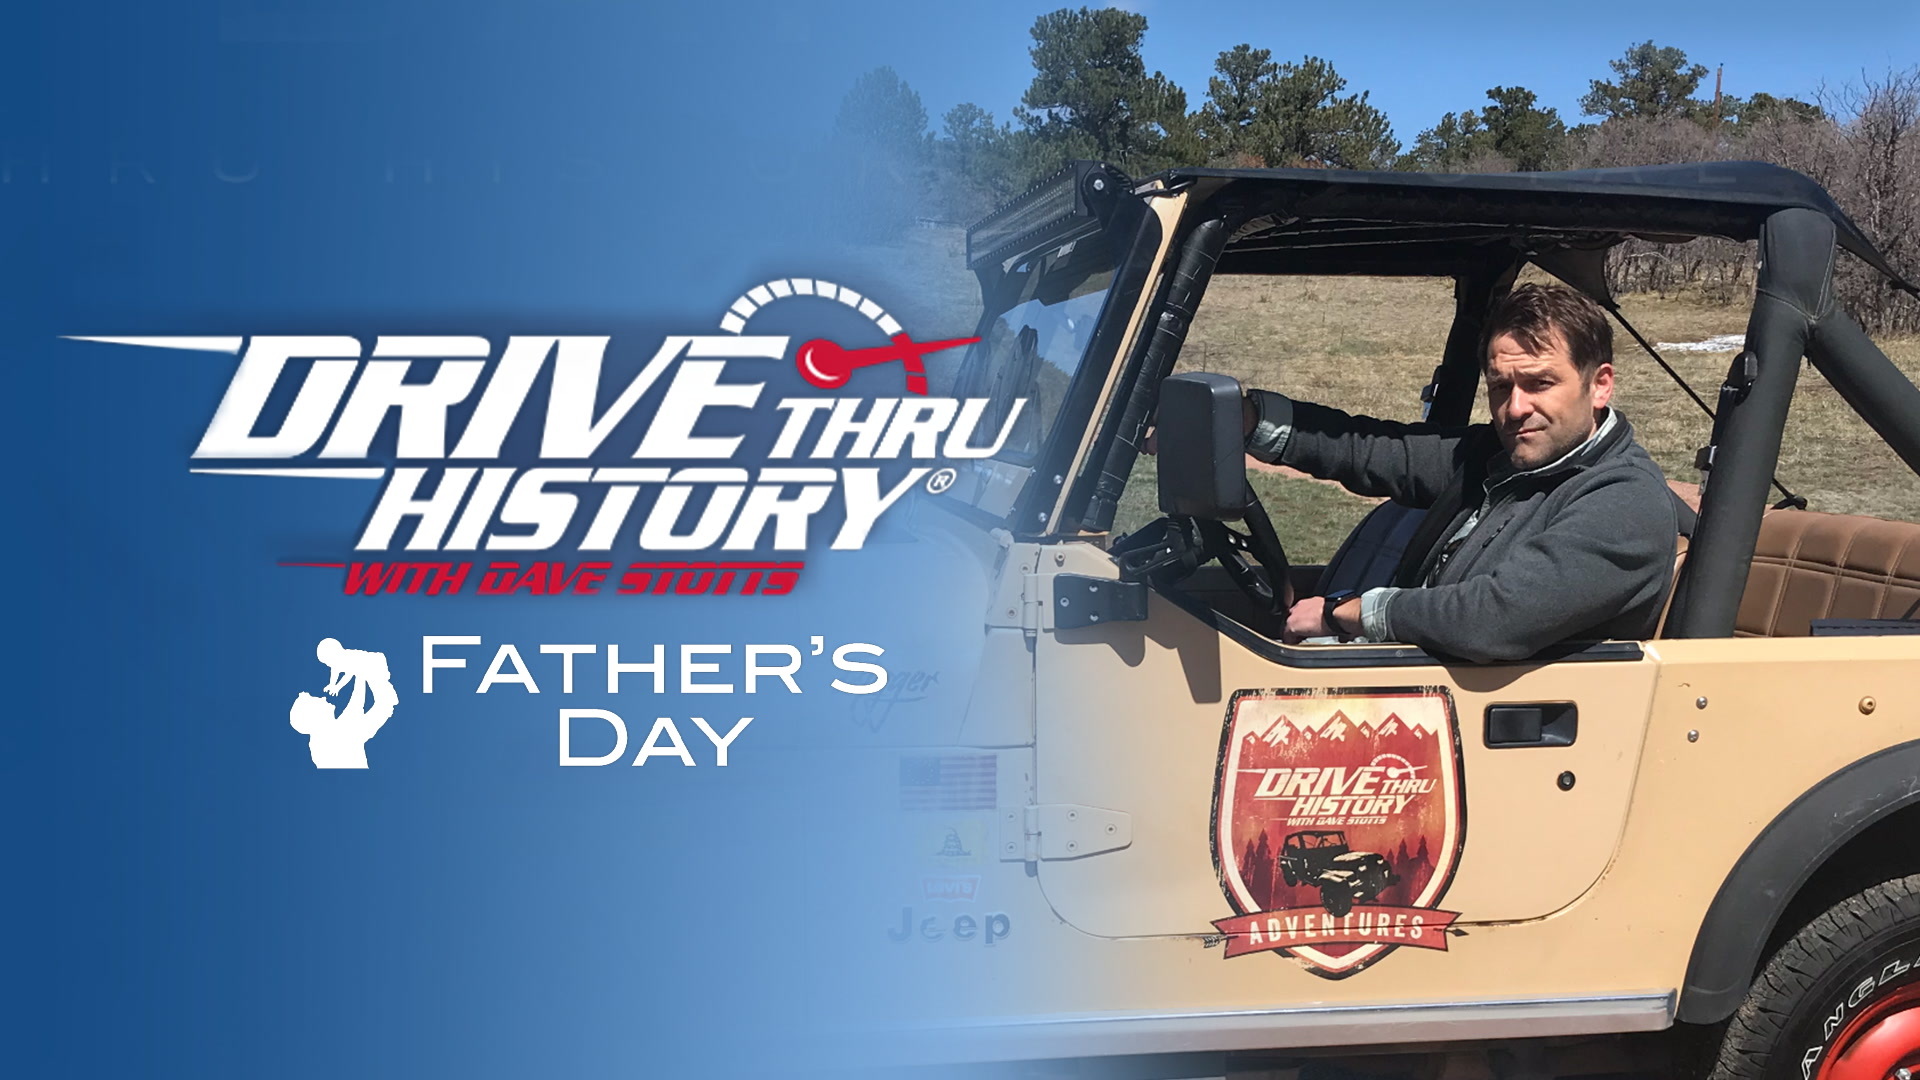 drive_thru_history_special_fathers_day.jpeg